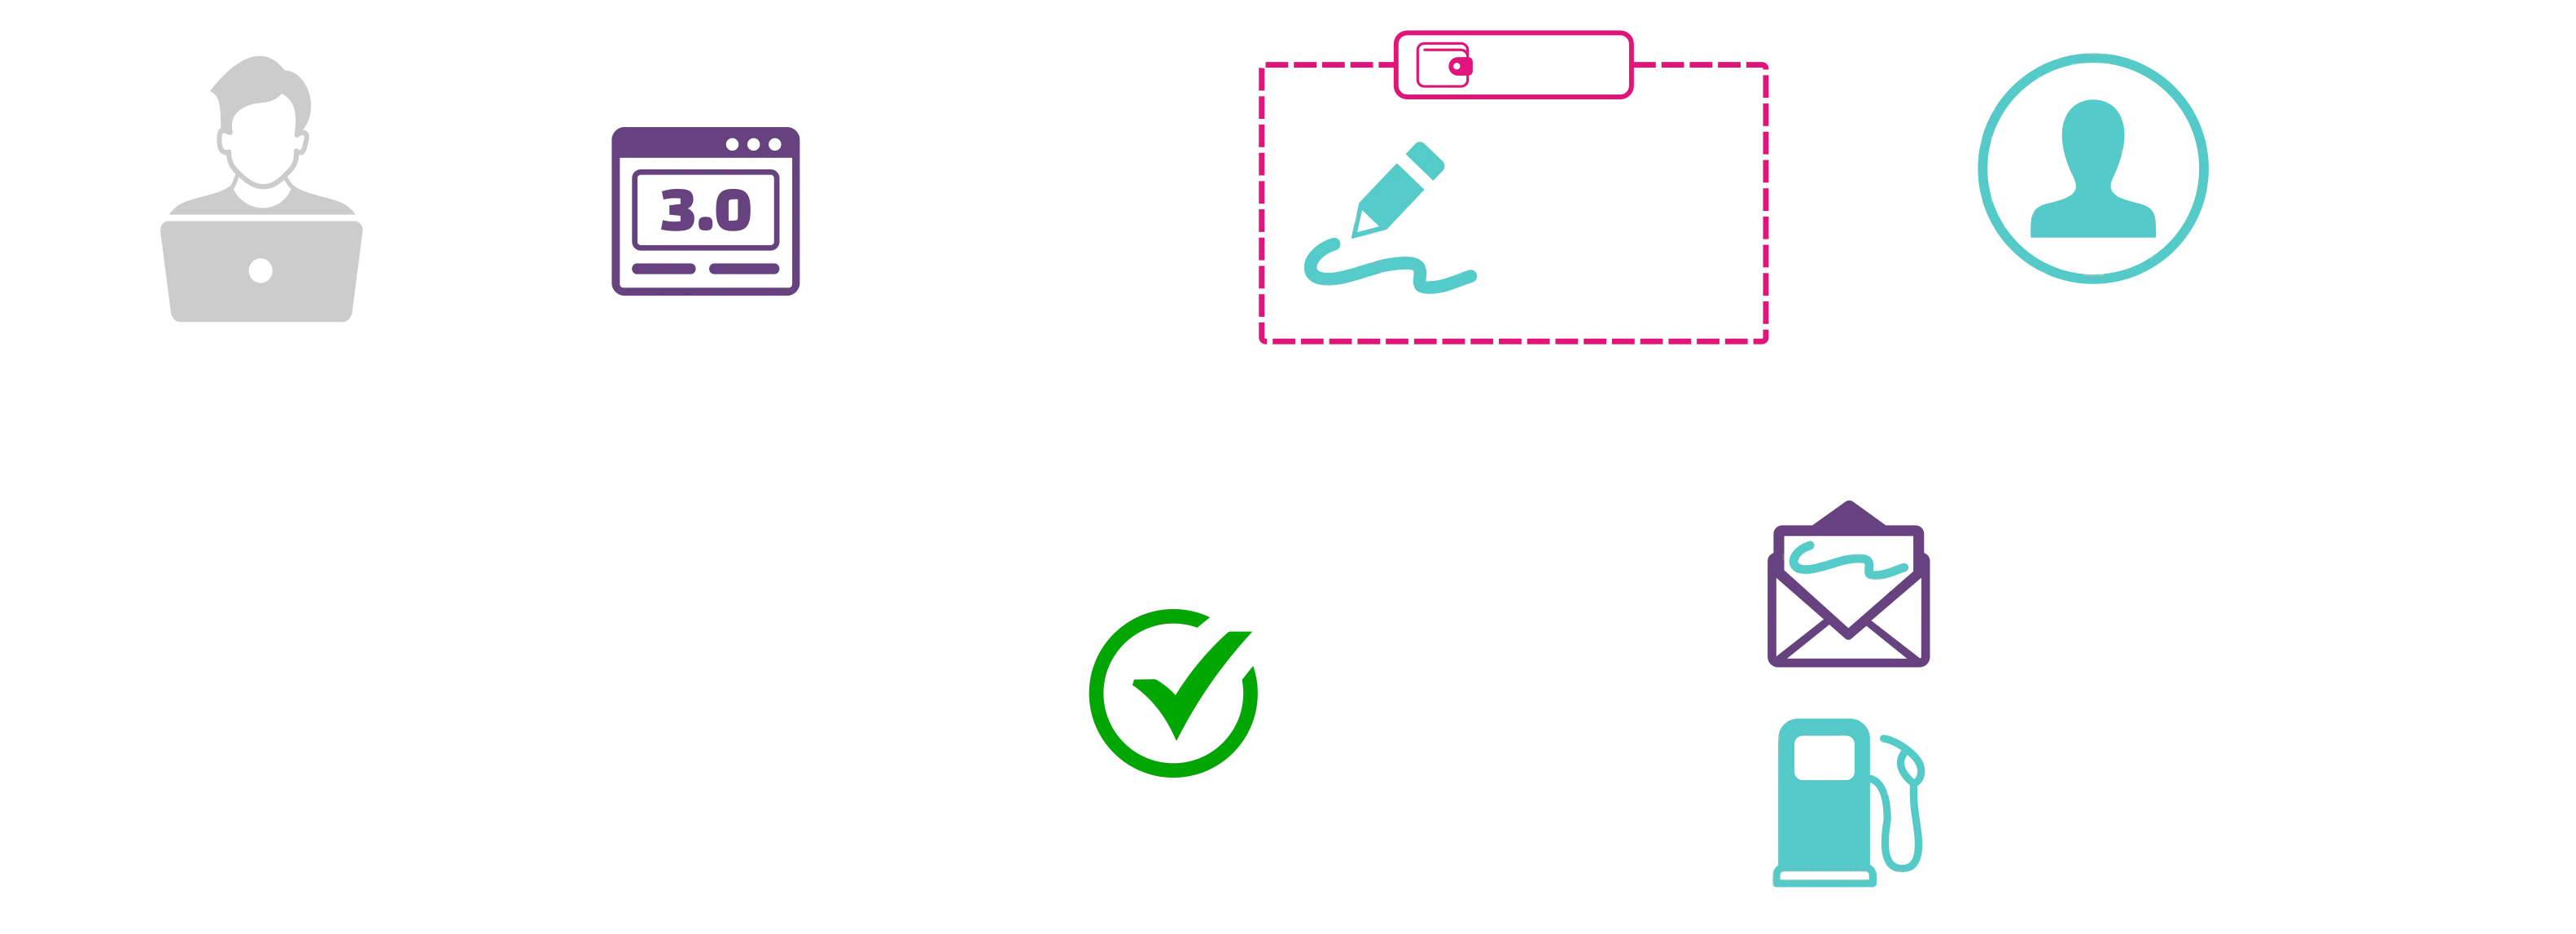 Flow of a gasless transaction